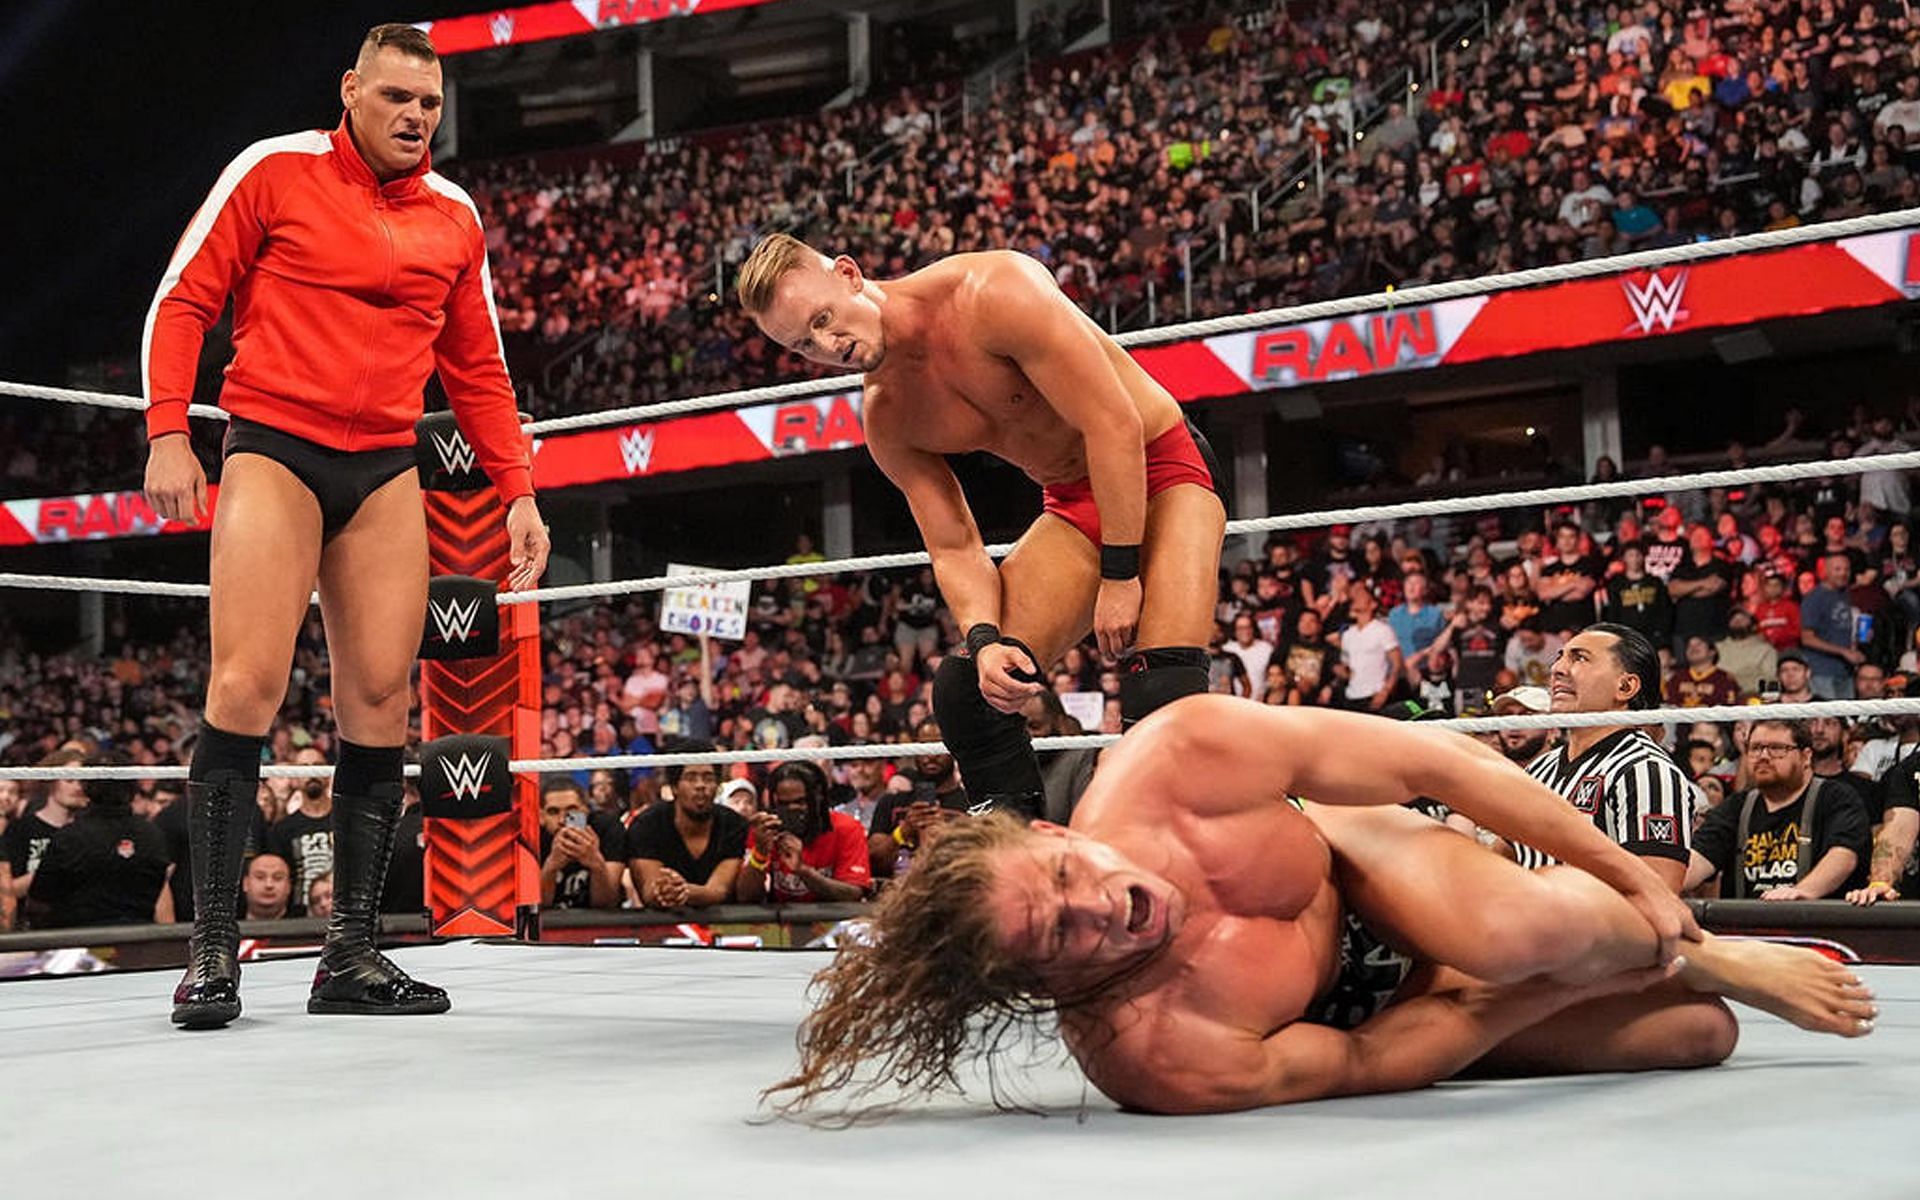 Gunther attacked Riddle last week on WWE RAW